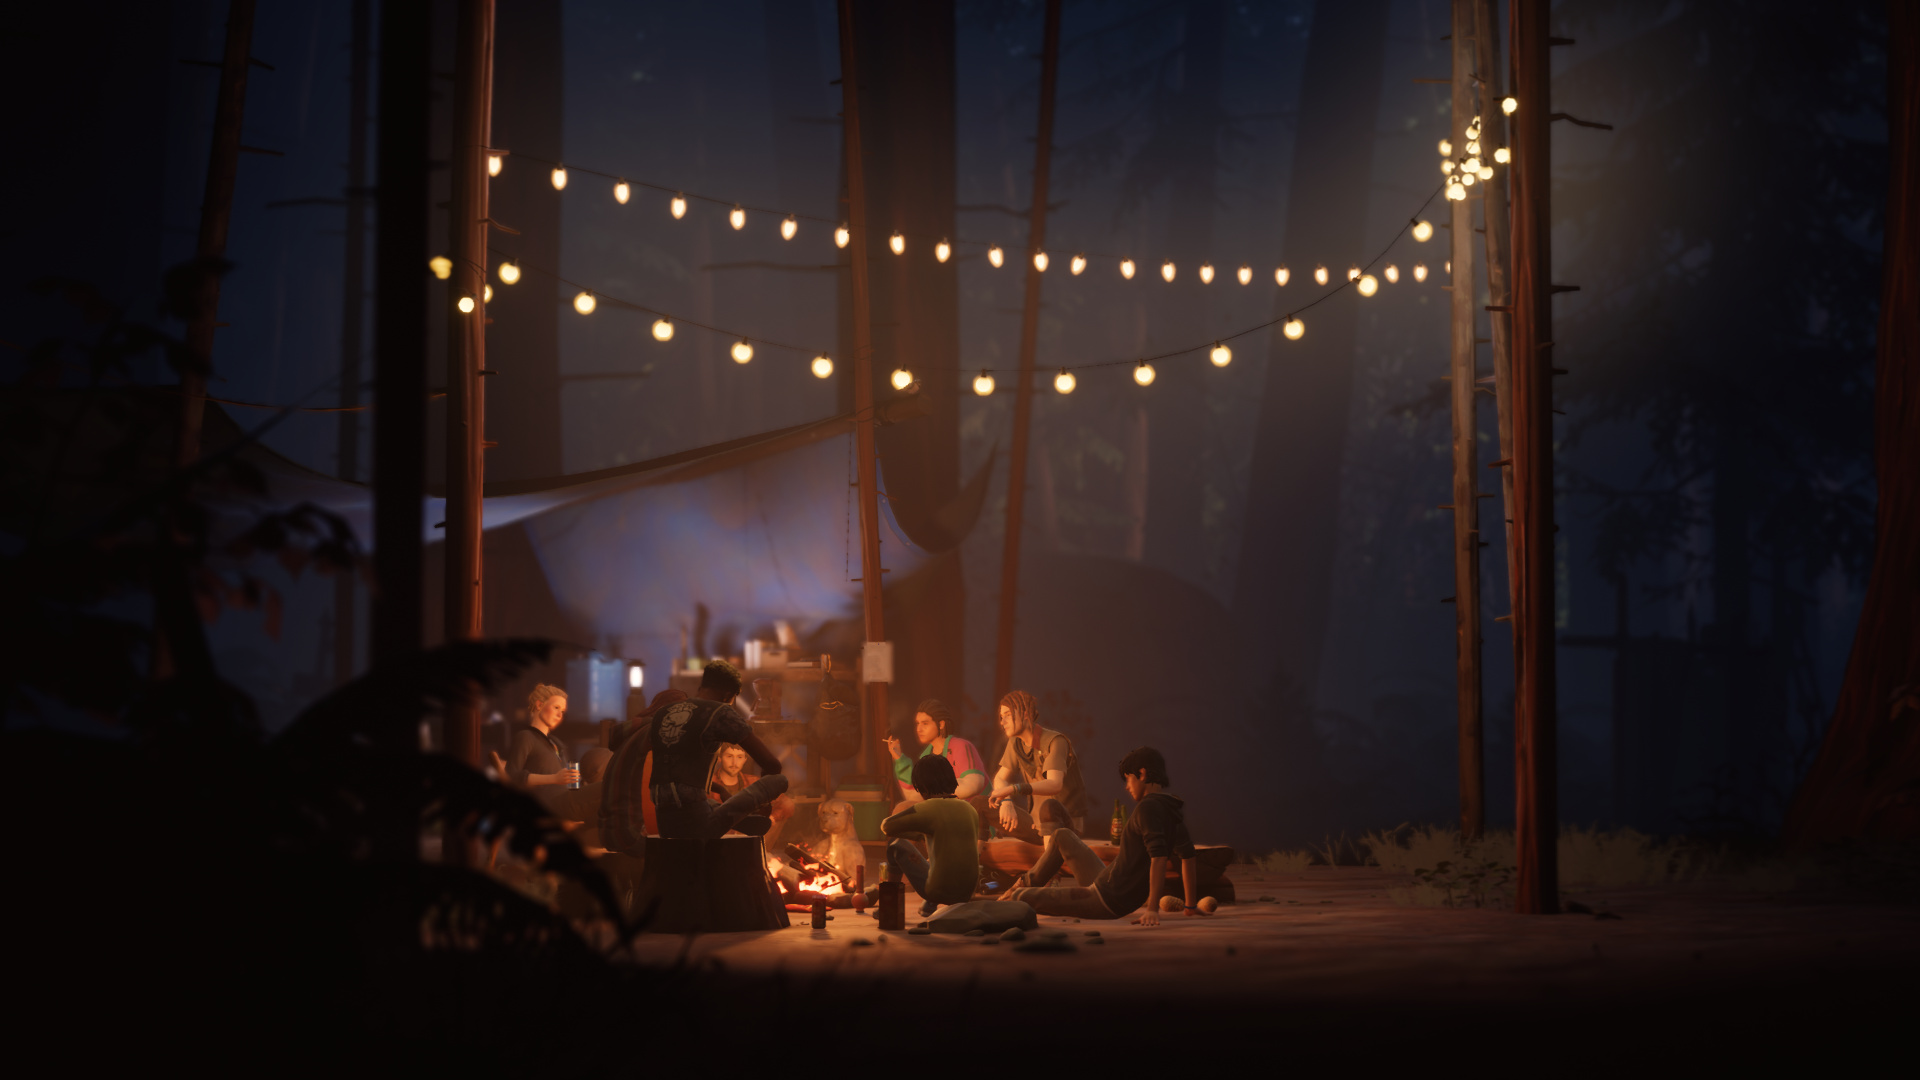 Life is Strange 2 - Choices and Outcomes Episode 3 - Chapter 6 - Campfire Tales